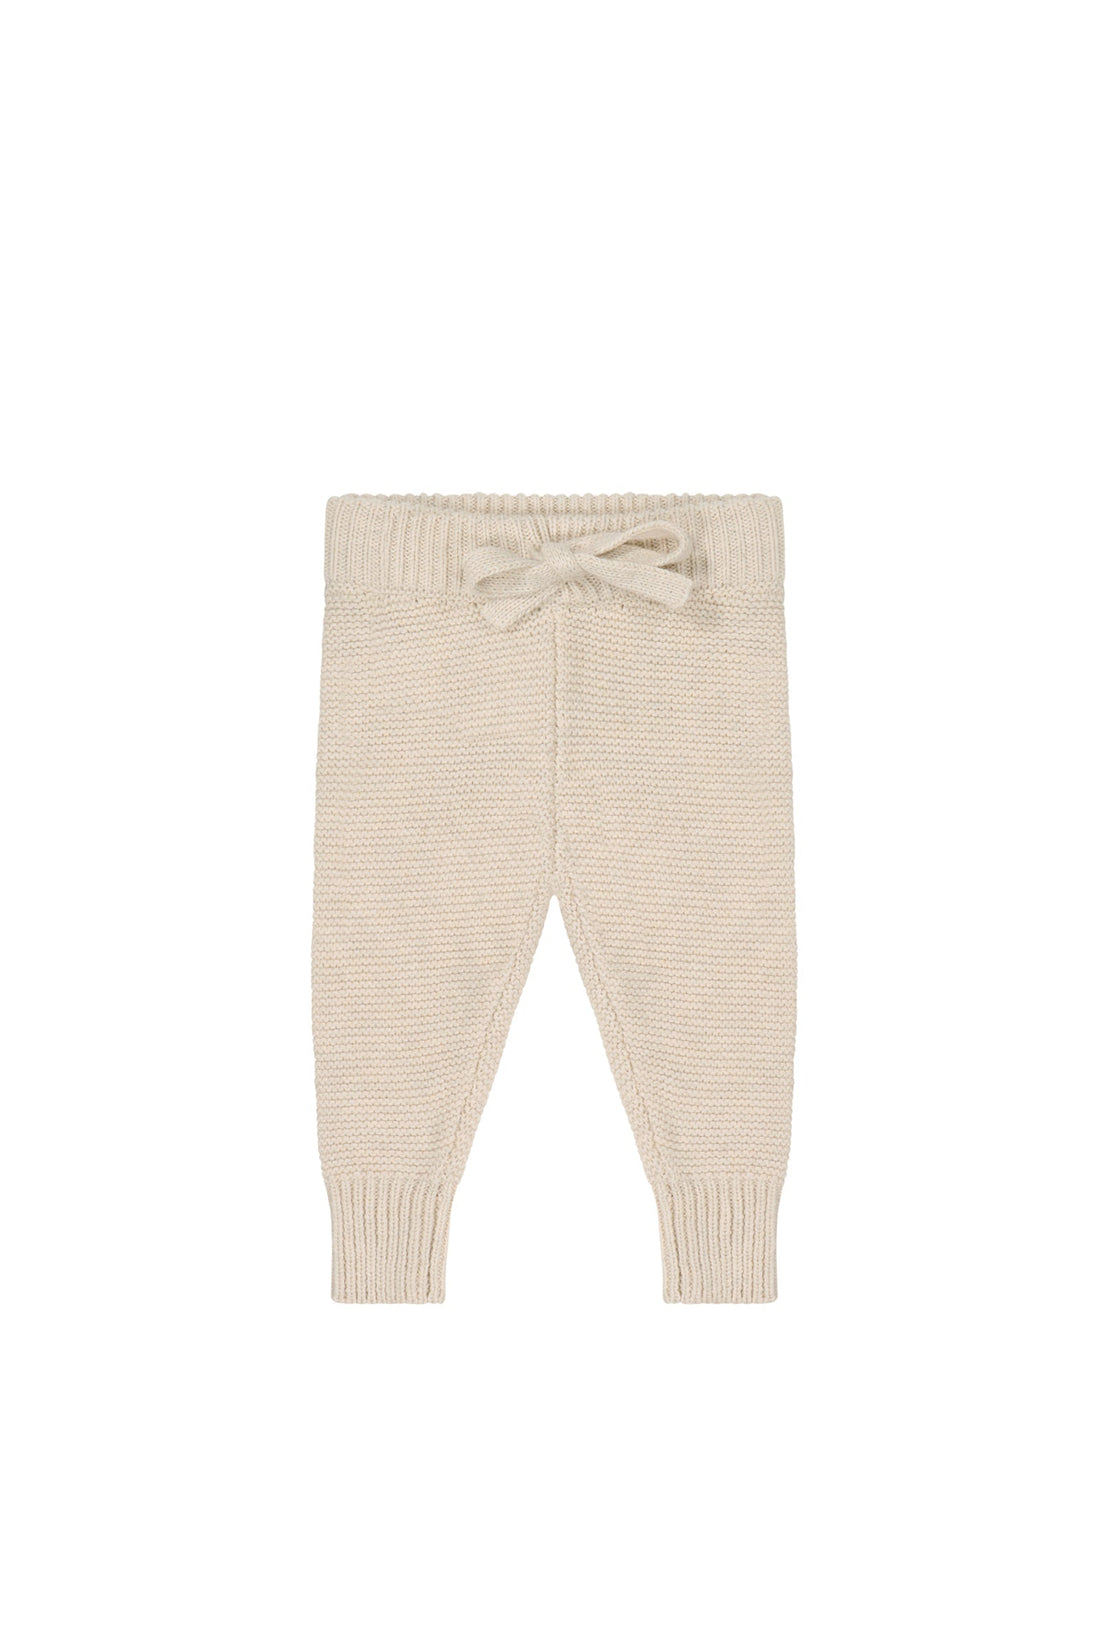 Ethan Pant - Oatmeal Marle Childrens Pant from Jamie Kay USA